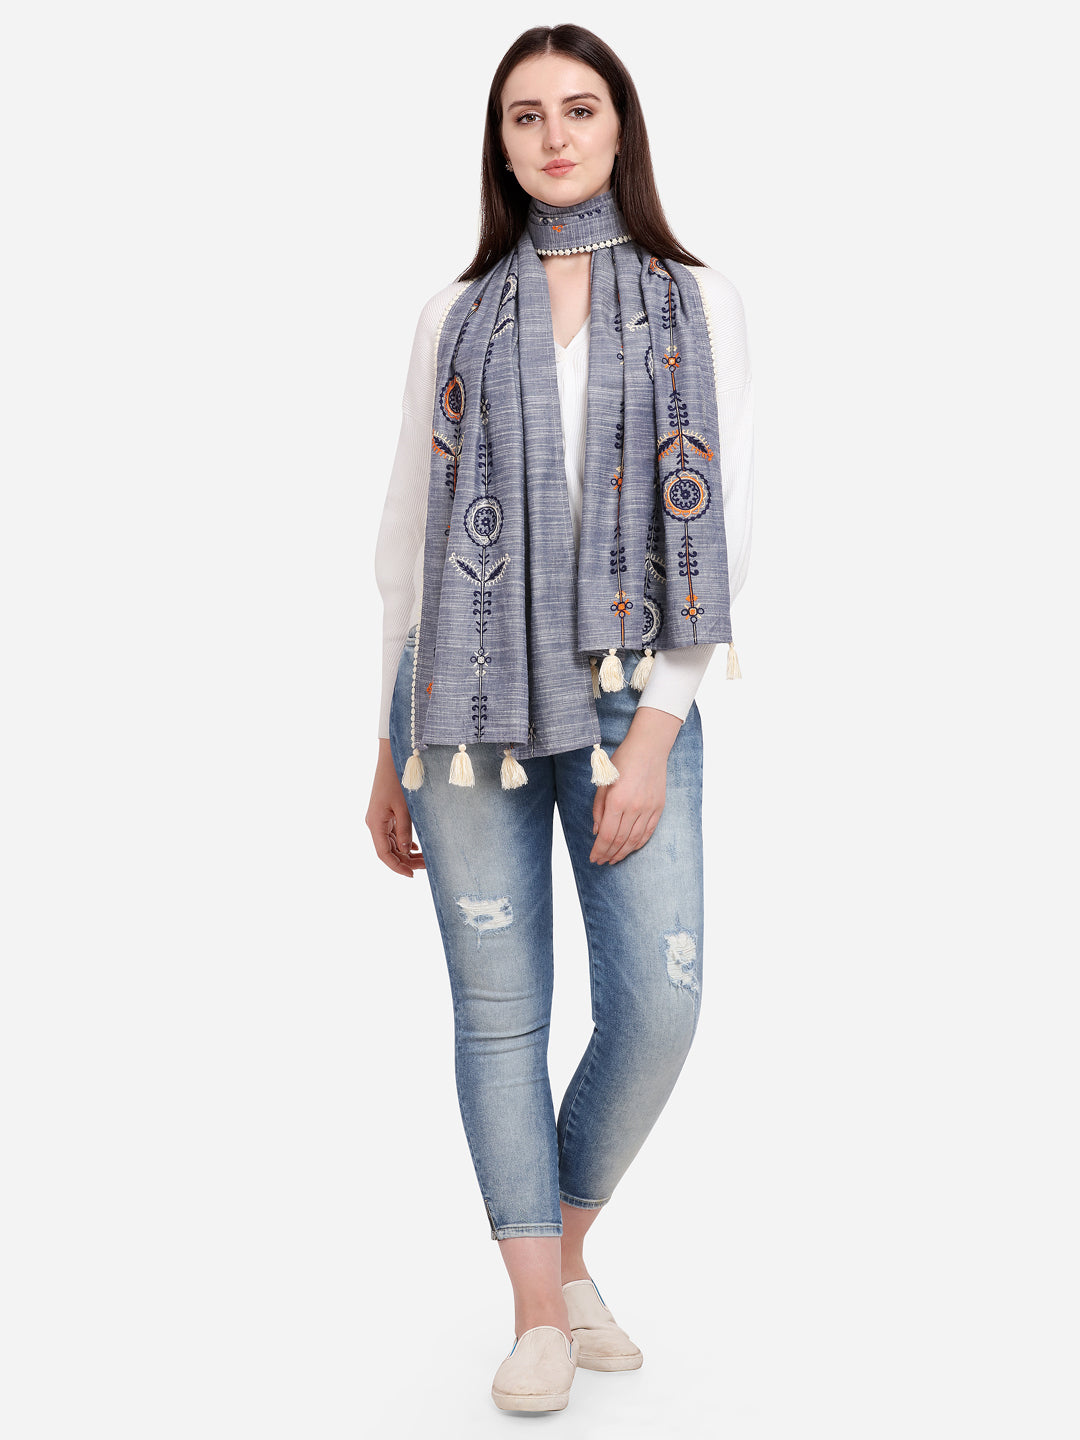 Women's   Charmed Cement Indigo Khadi Embrodiered Stole/Scarf - MESMORA FASHIONS